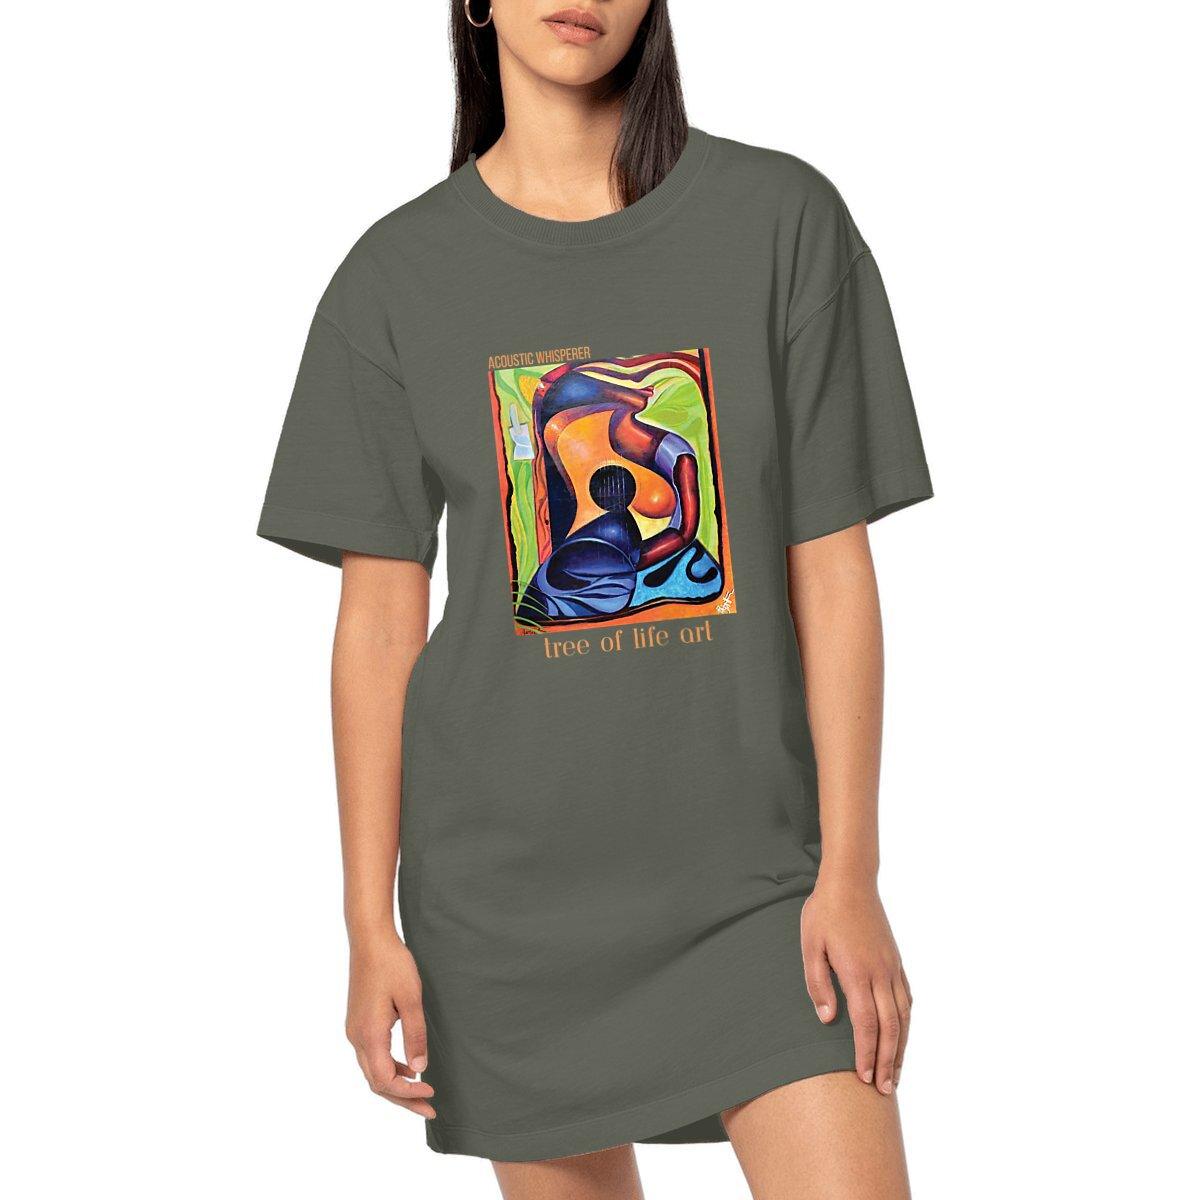 Acoustic Whisperer premium plus woman's T-shirt dress, made from 100% organic cotton, designed by Tree of Life Art, ideal for eco-conscious style."